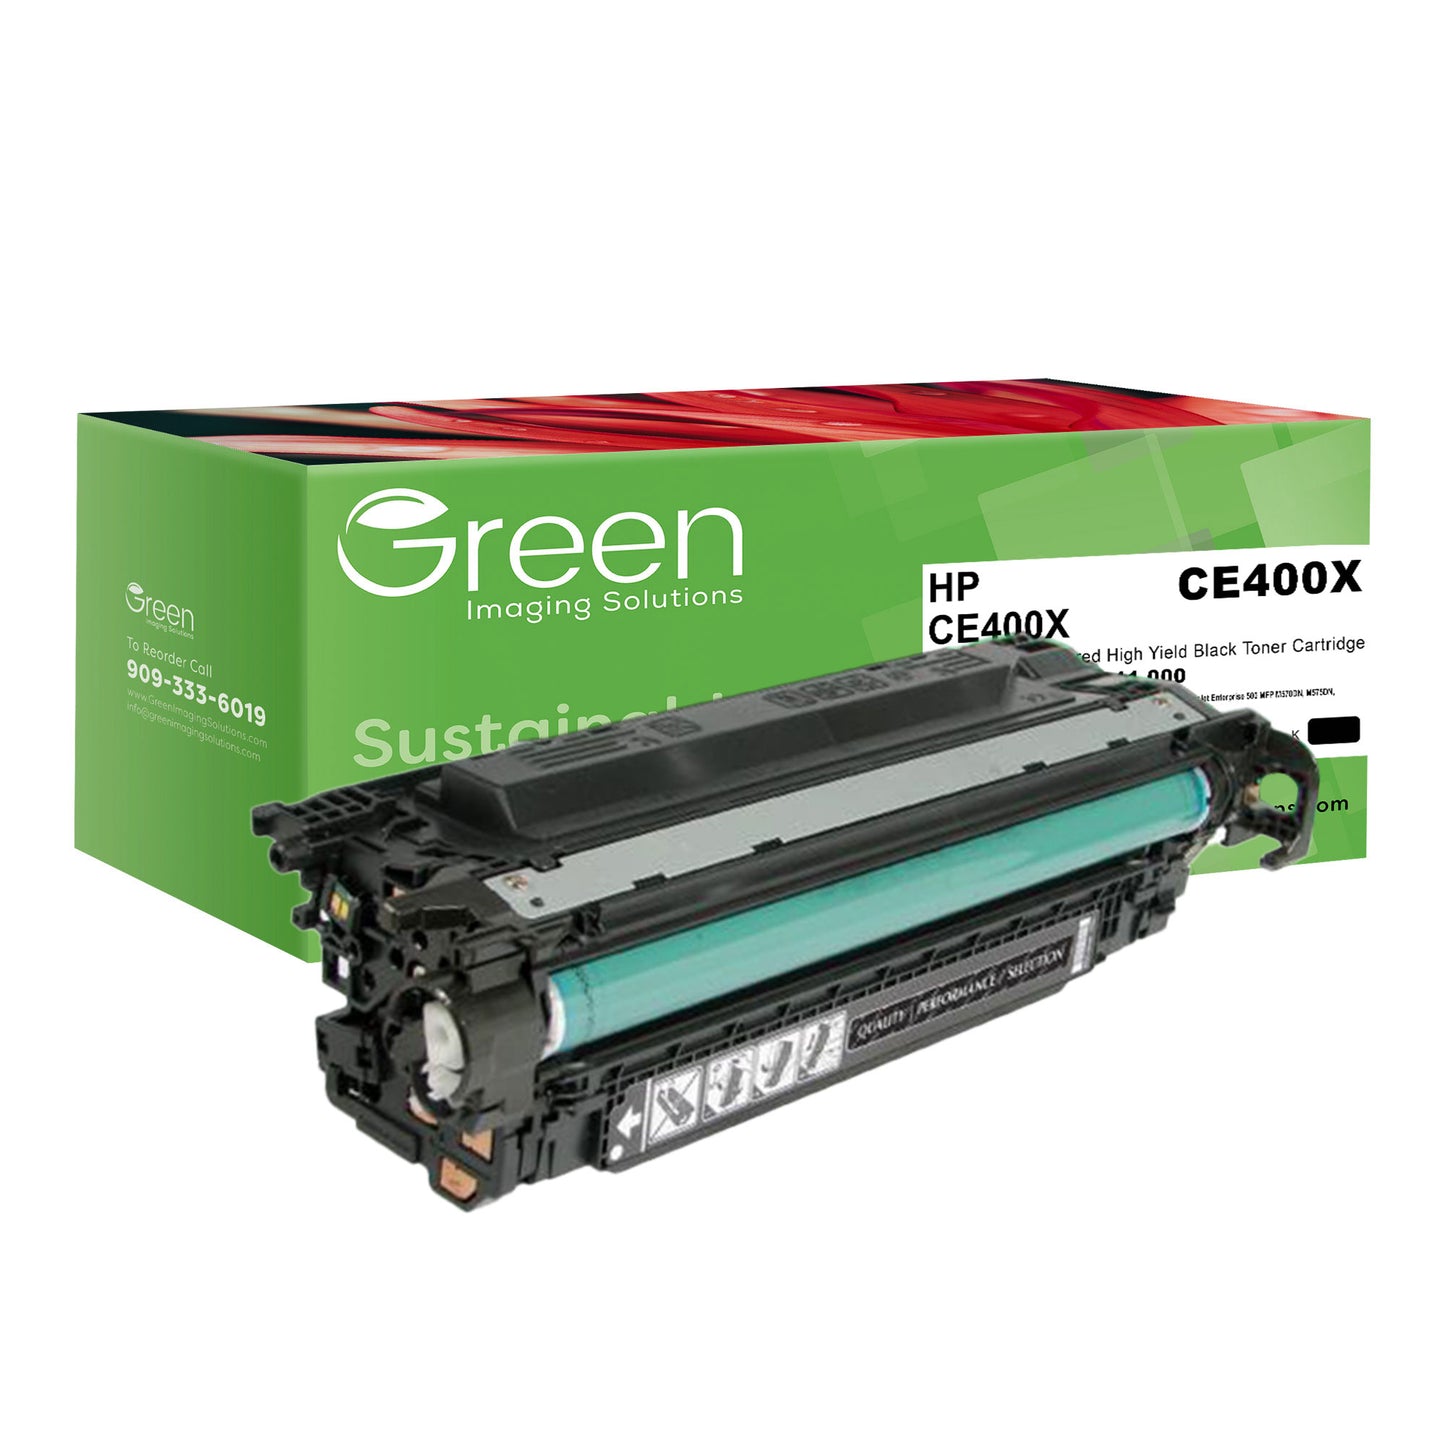 GIS USA Remanufactured High Yield Black Toner Cartridge for HP CE400X (HP 507X)